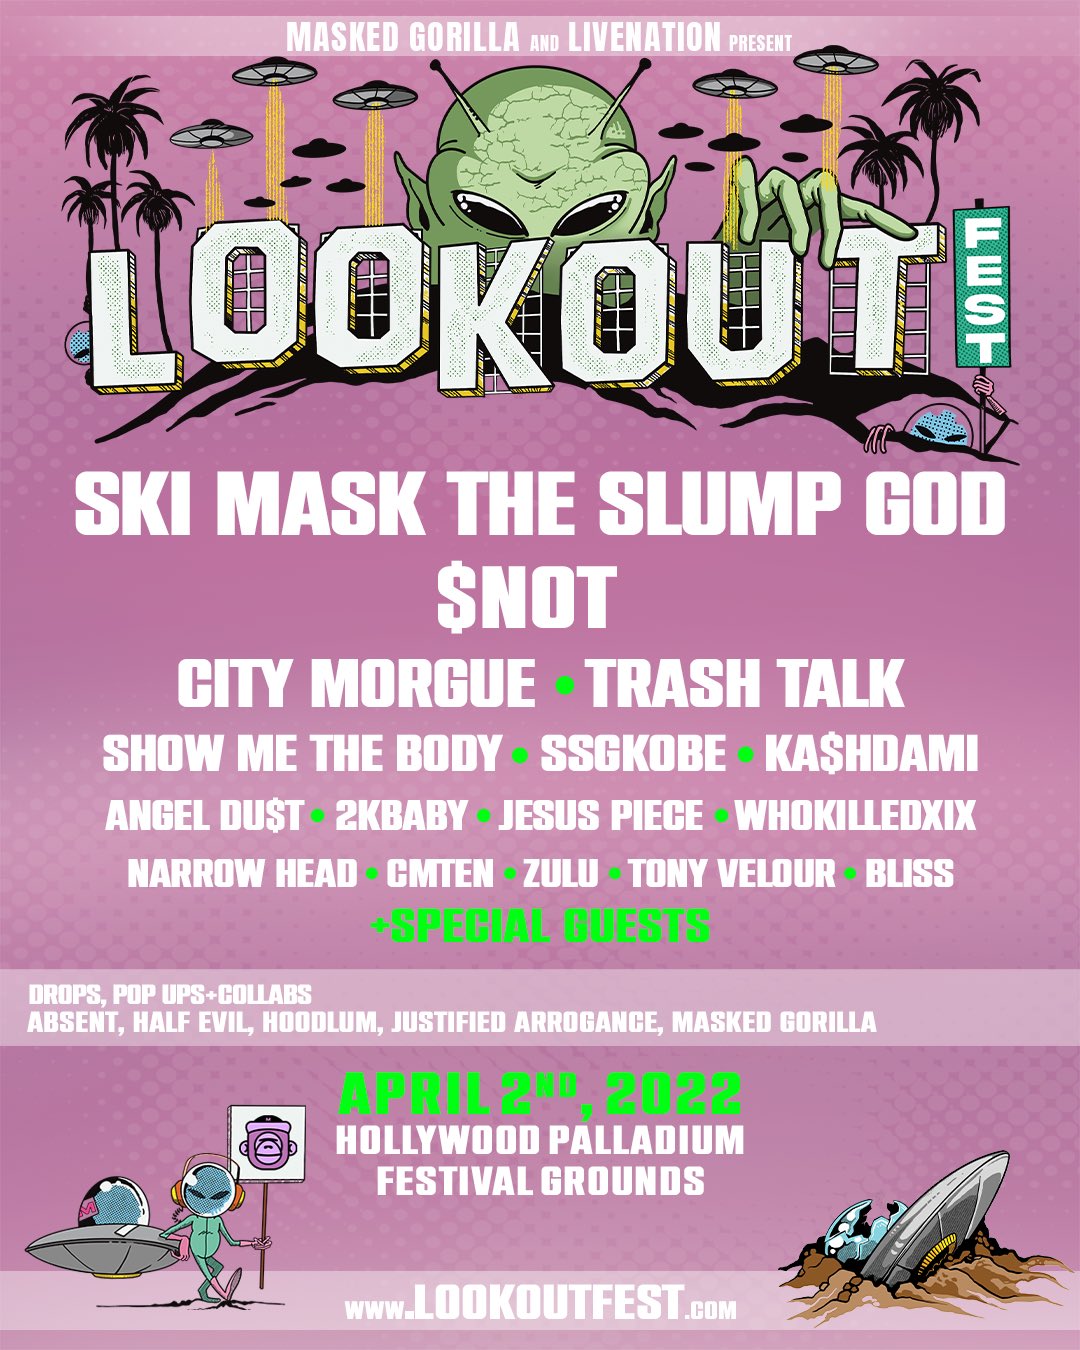 Masked on Twitter: "Rap, hardcore, hyper pop, streetwear and more 👀 Masked Gorilla &amp; Live Nation present Lookout Fest: algorithm-breaking music festival Tickets on sale Friday at 12PM PST